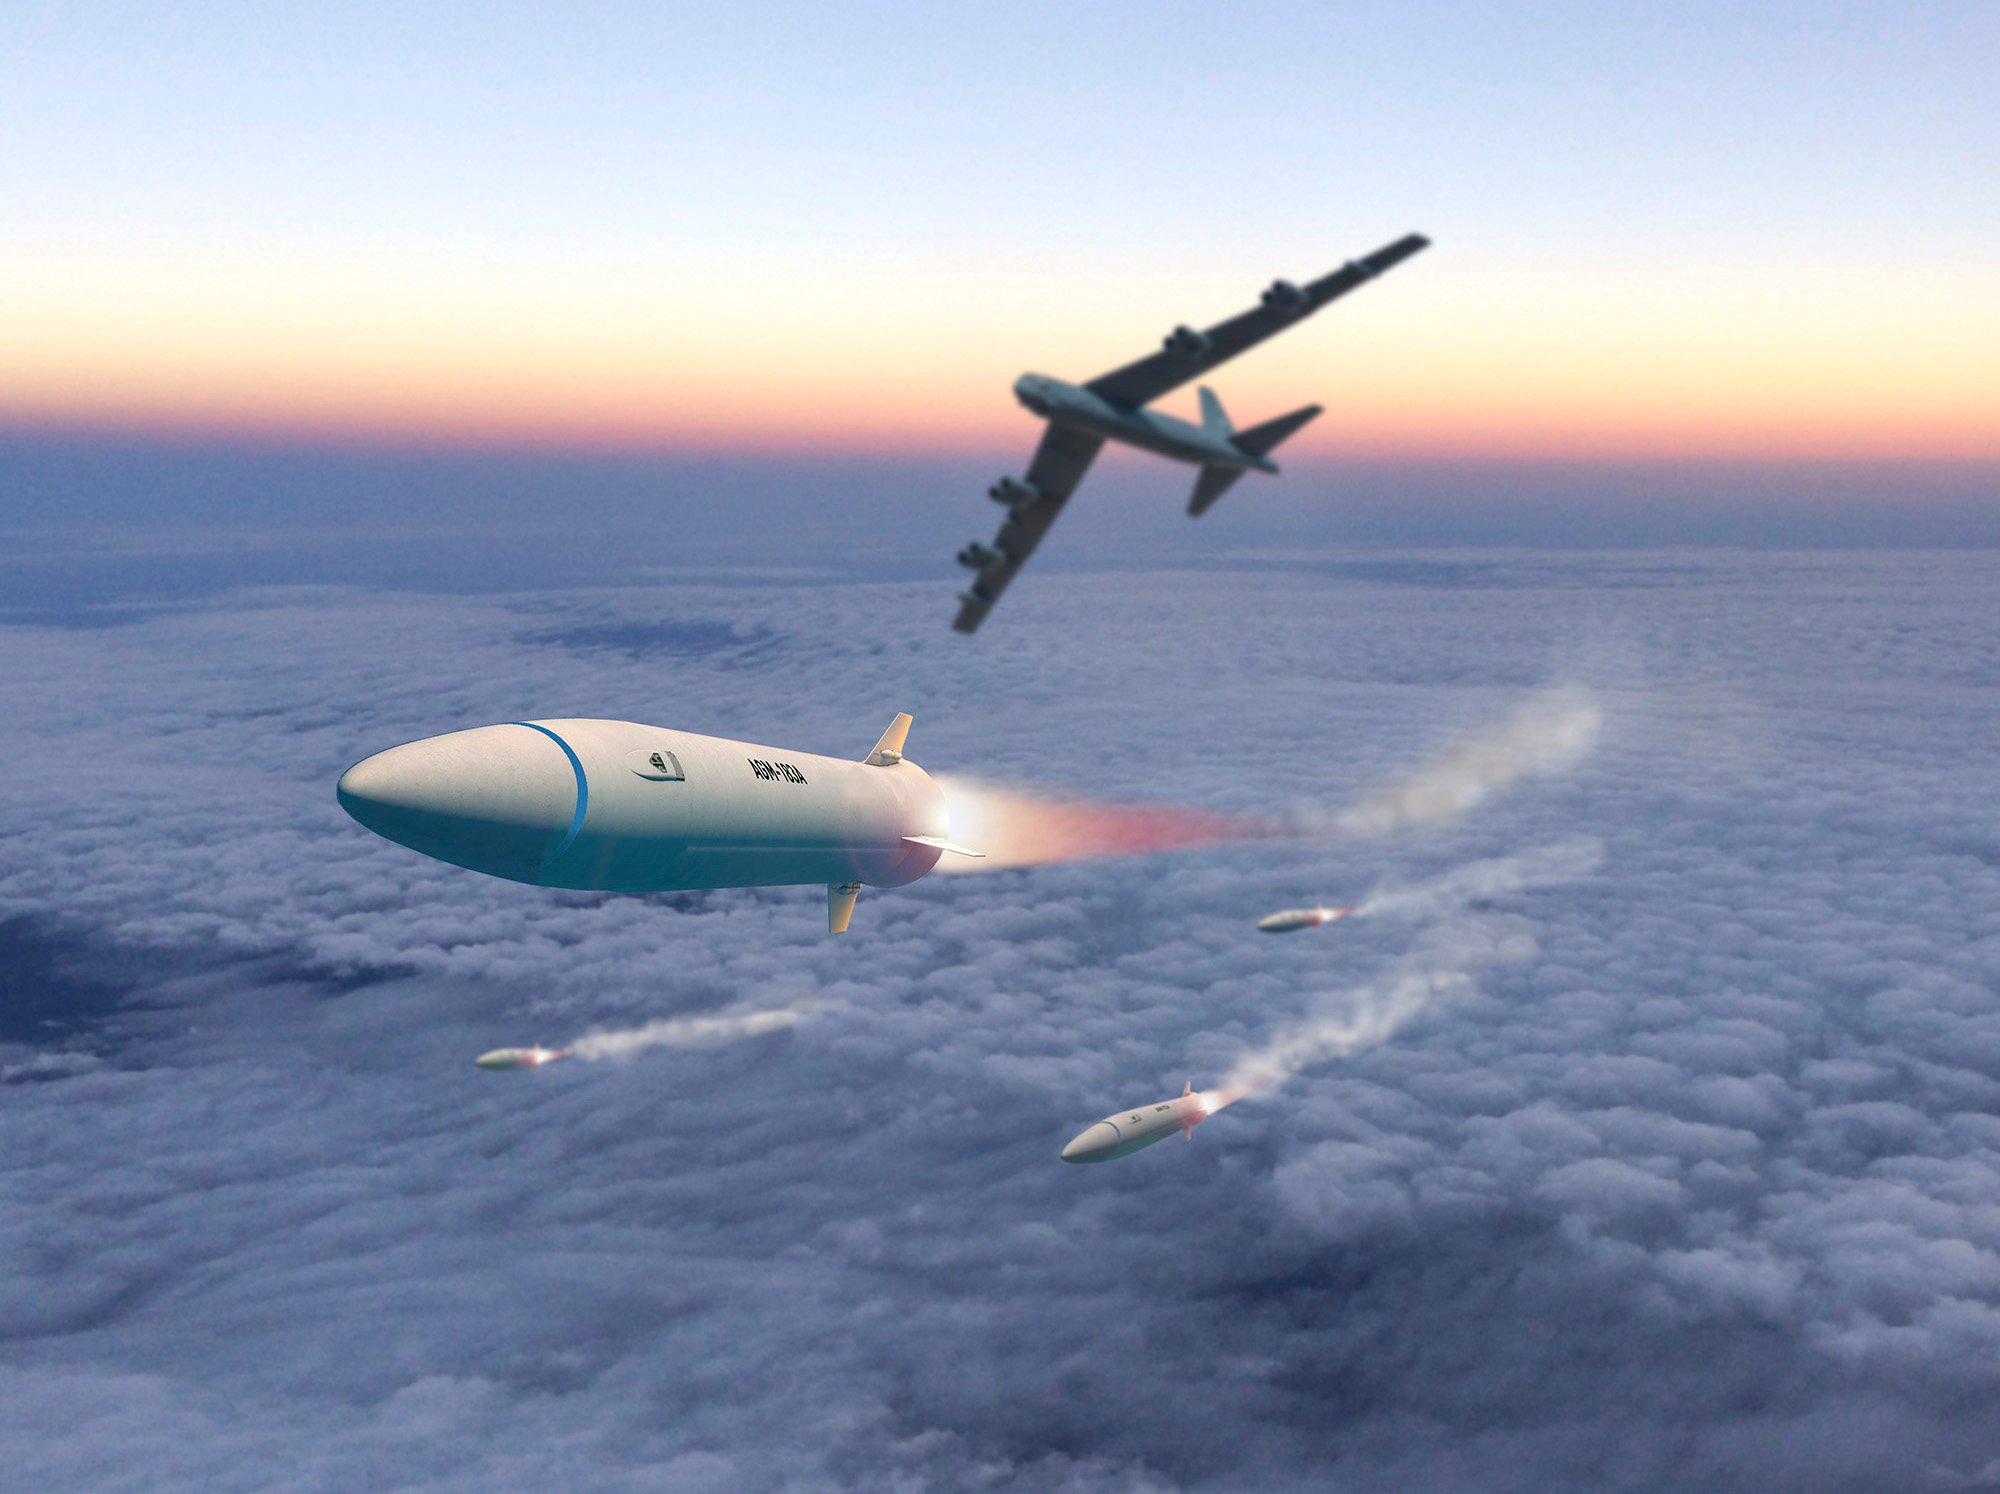 China and the US are in a race to develop hypersonic weapons, which are seen as potential game-changers in modern warfare. Photo: USAF